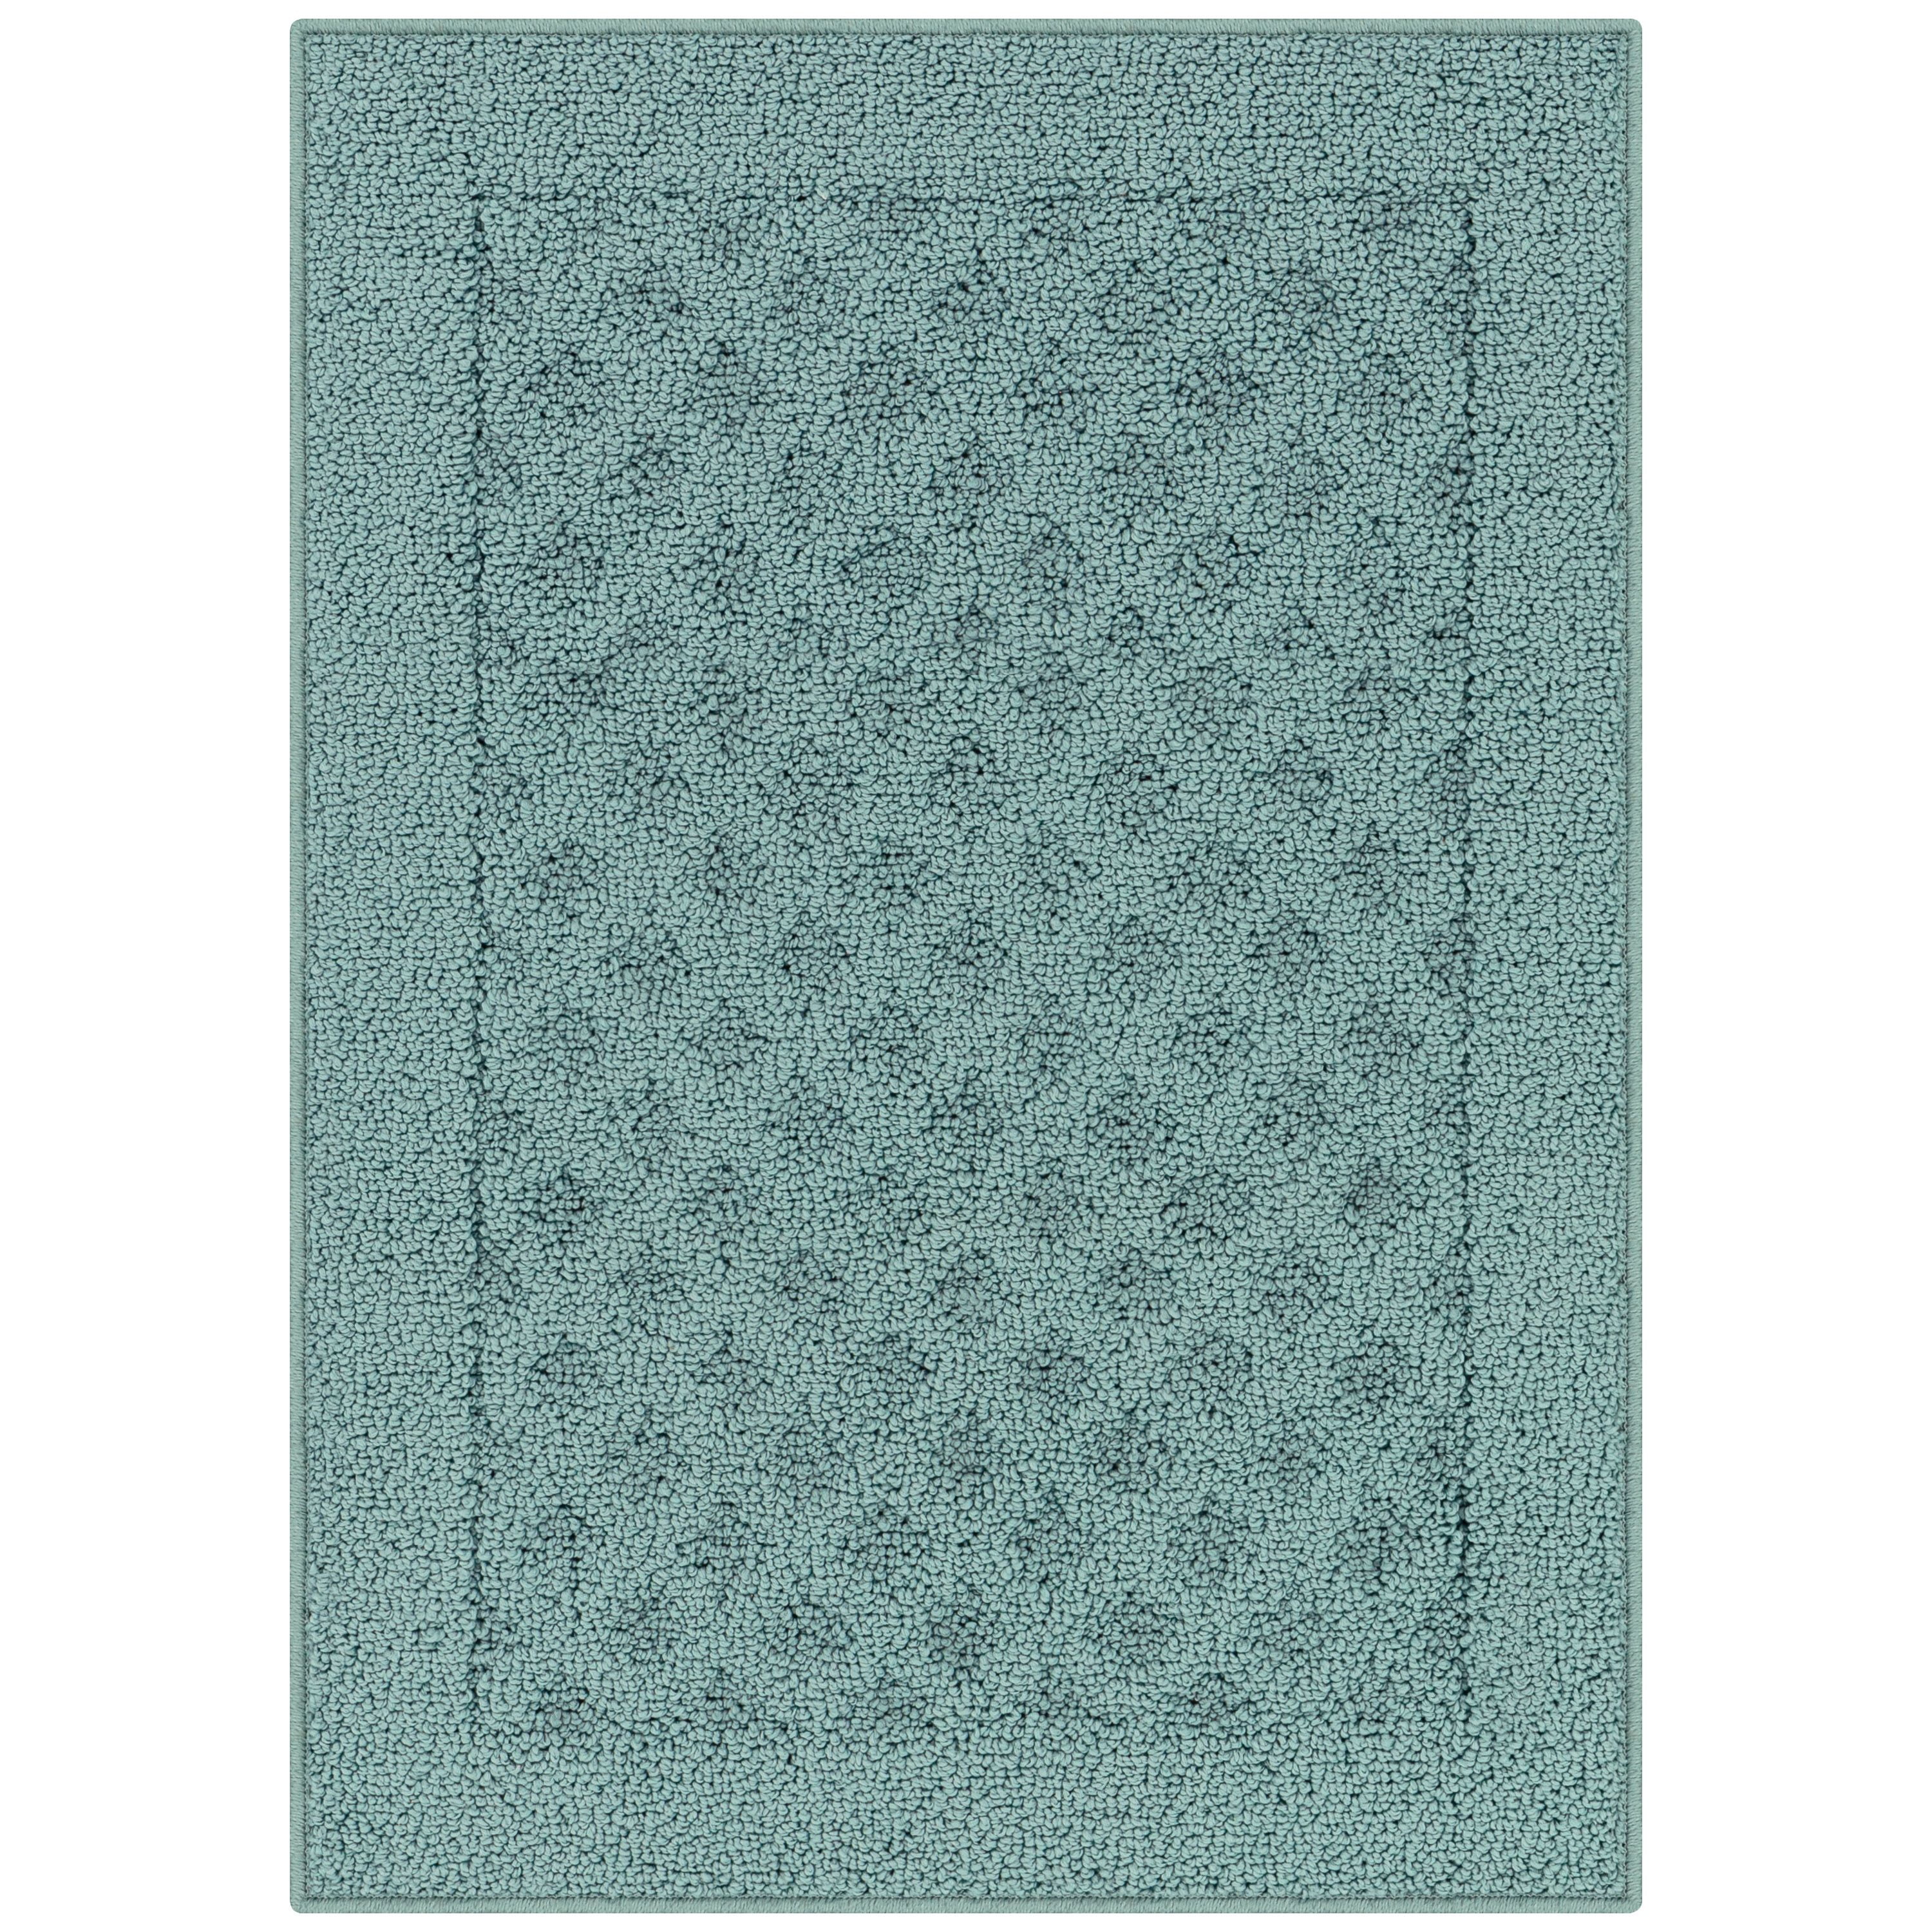 Wall Mount Rug or Quit Hanger in Turquoise Pine with Santa Fe Accent –  Specialty Decor by Sunland Home